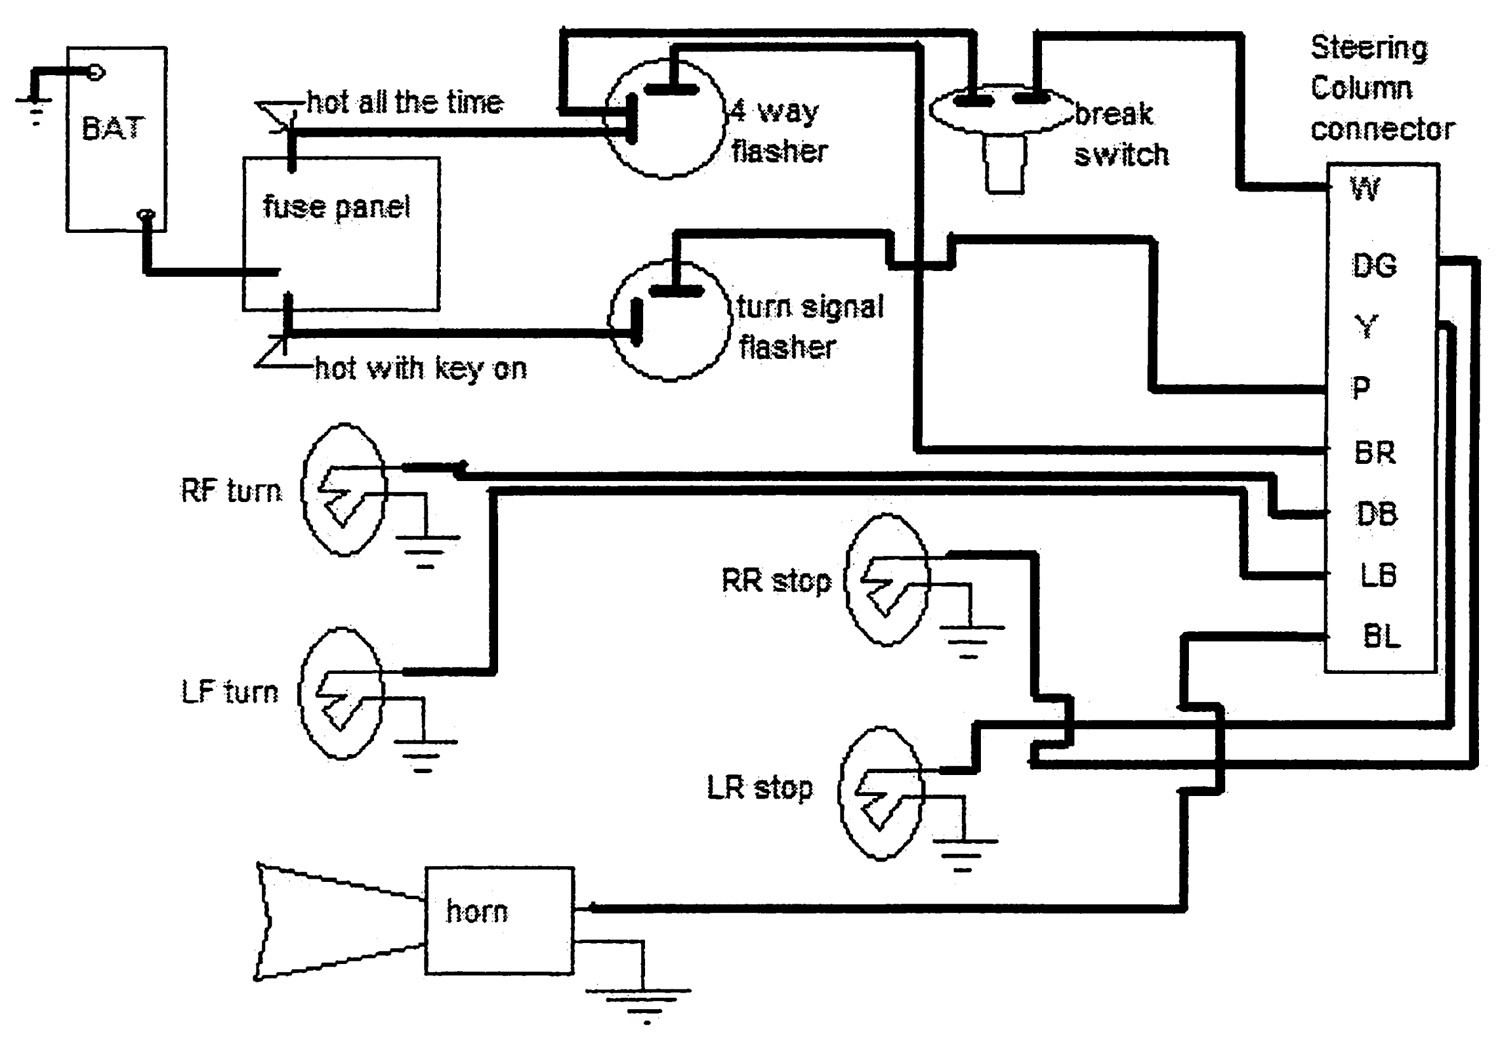 Speed Tech Lights Wiring Diagram to Change This Connector for Any Reason the Following Schematic